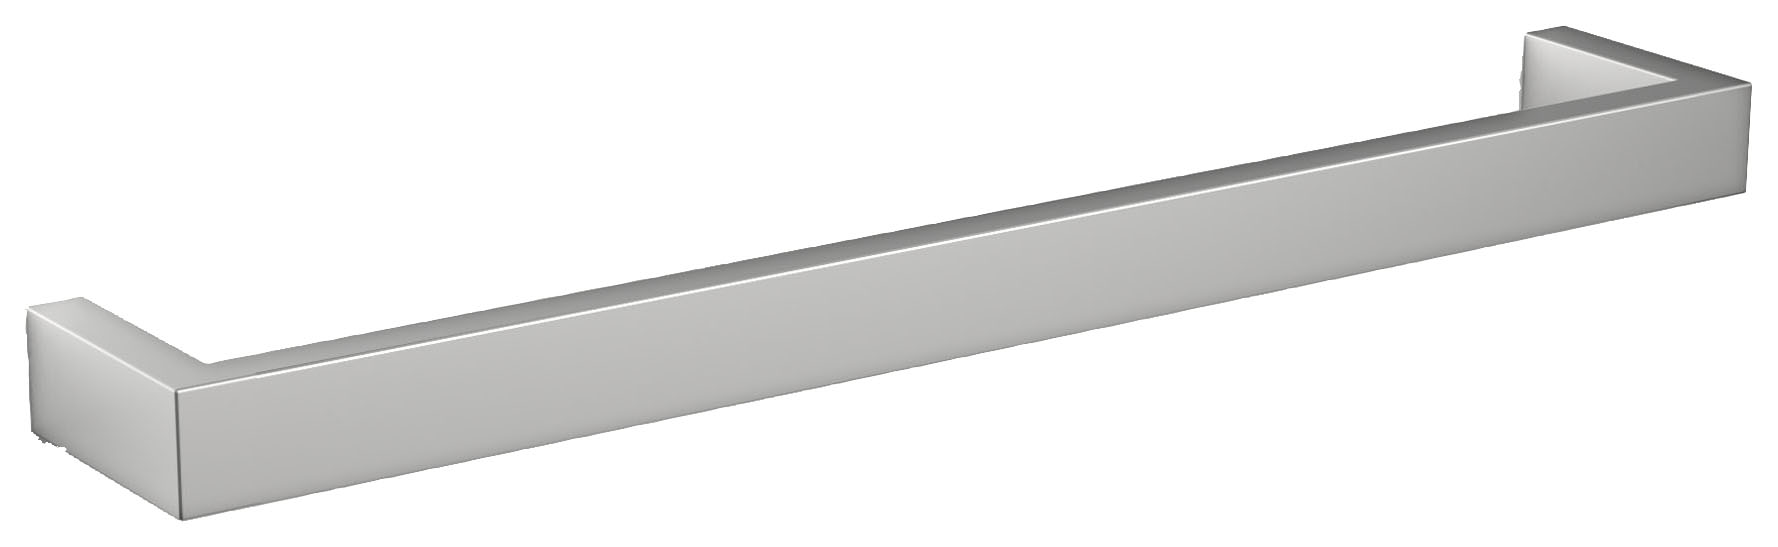 Image of Towelrads Elcot Brushed Stainless Dry Electric Towel Bar - 450mm